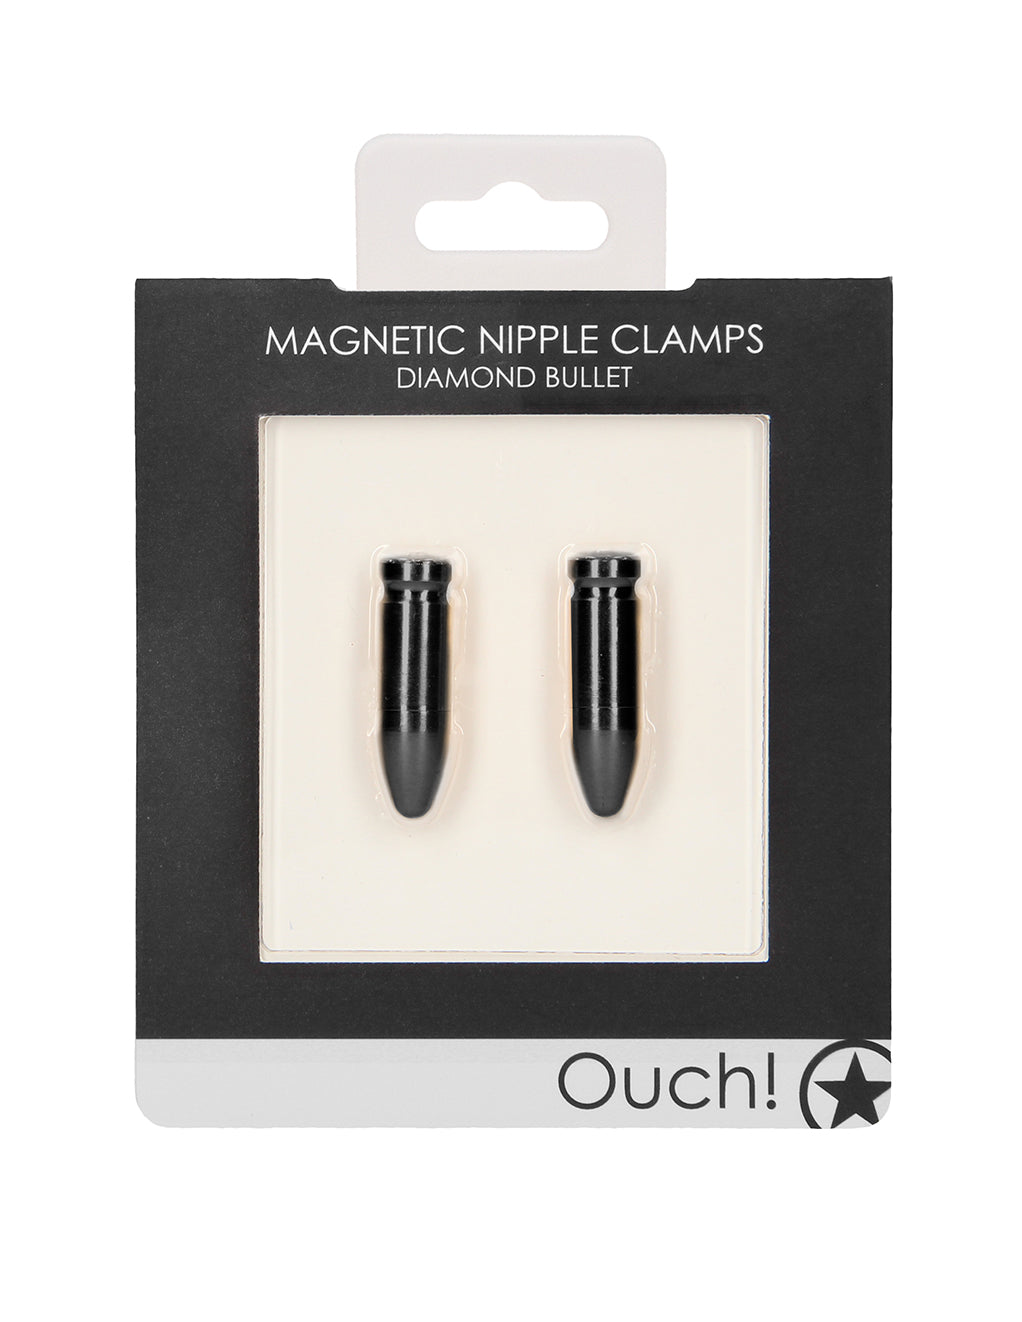 Ouch! Magnetic Diamond Bullet Nipple Clamps- Black- Package